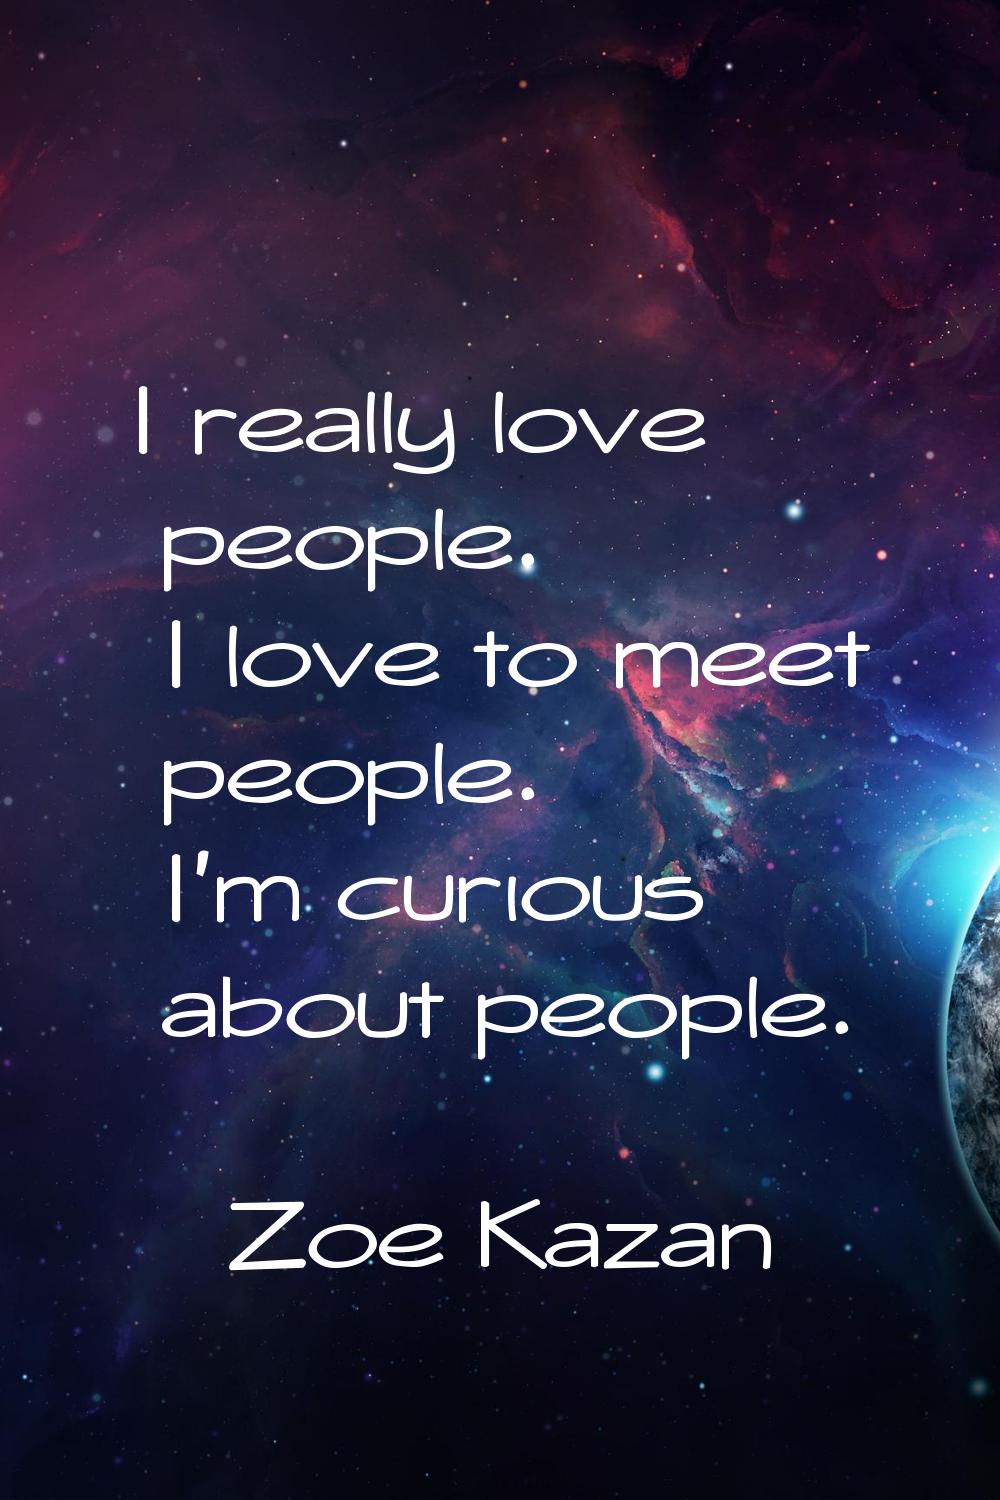 I really love people. I love to meet people. I'm curious about people.